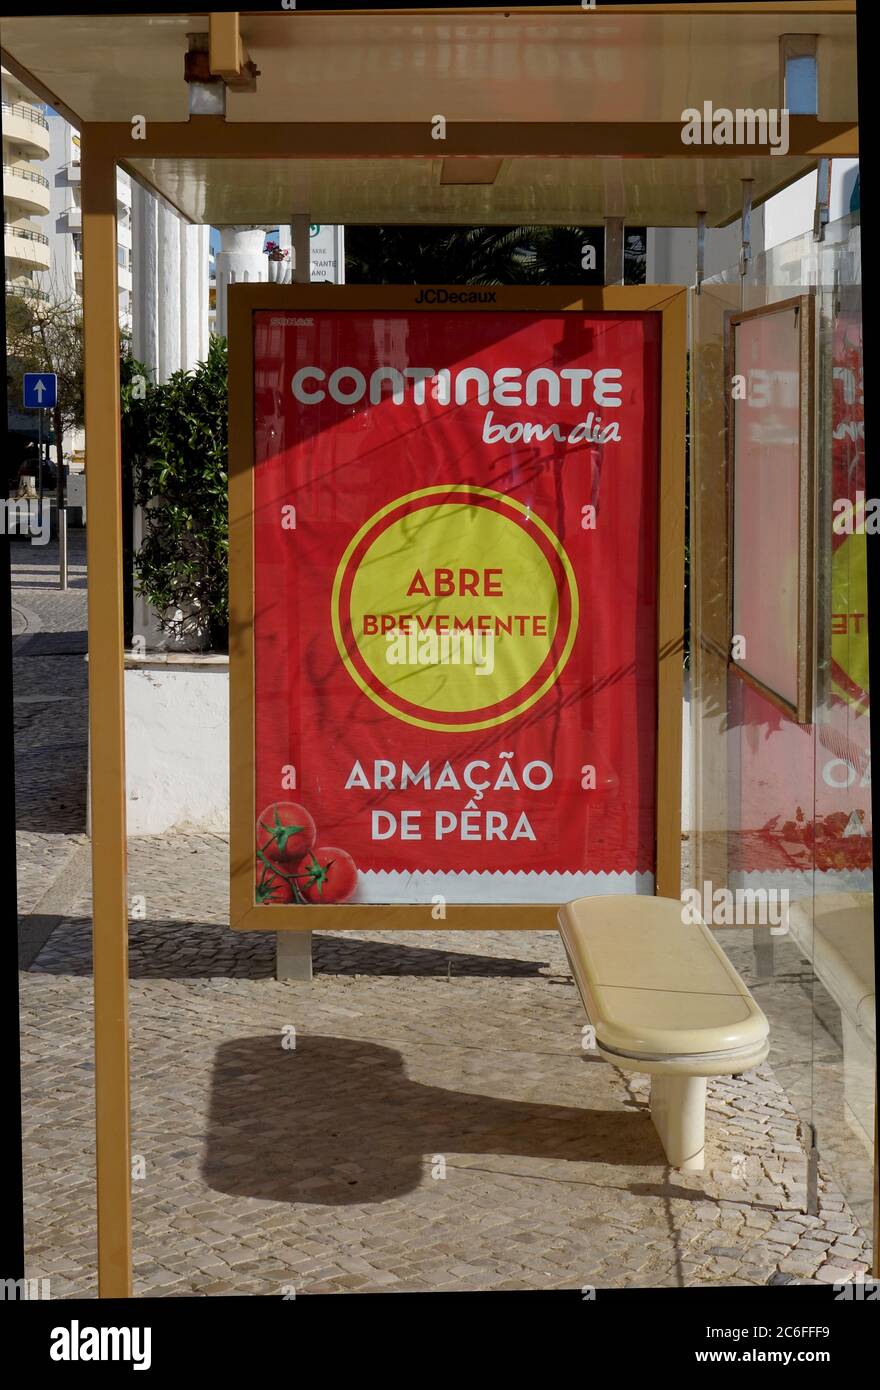 Bus Stop Shelter In Armacao De Pera With An Advertising Poster For Continente Supermarkets The Algarve Portugal Stock Photo